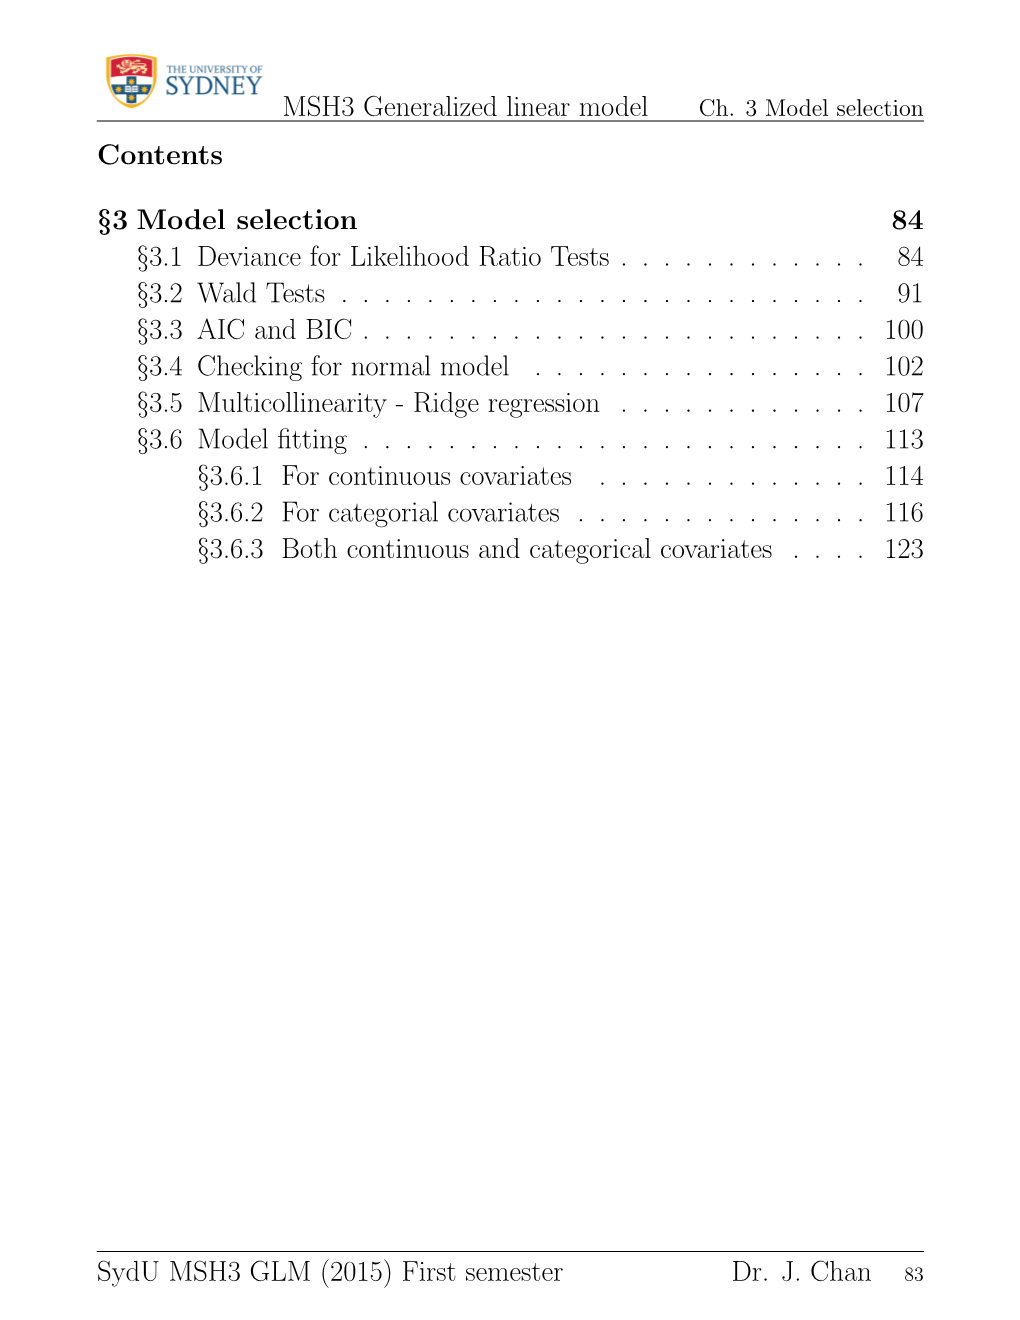 MSH3 Generalized Linear Model Contents §3 Model Selection 84 §3.1 Deviance for Likelihood Ratio Tests